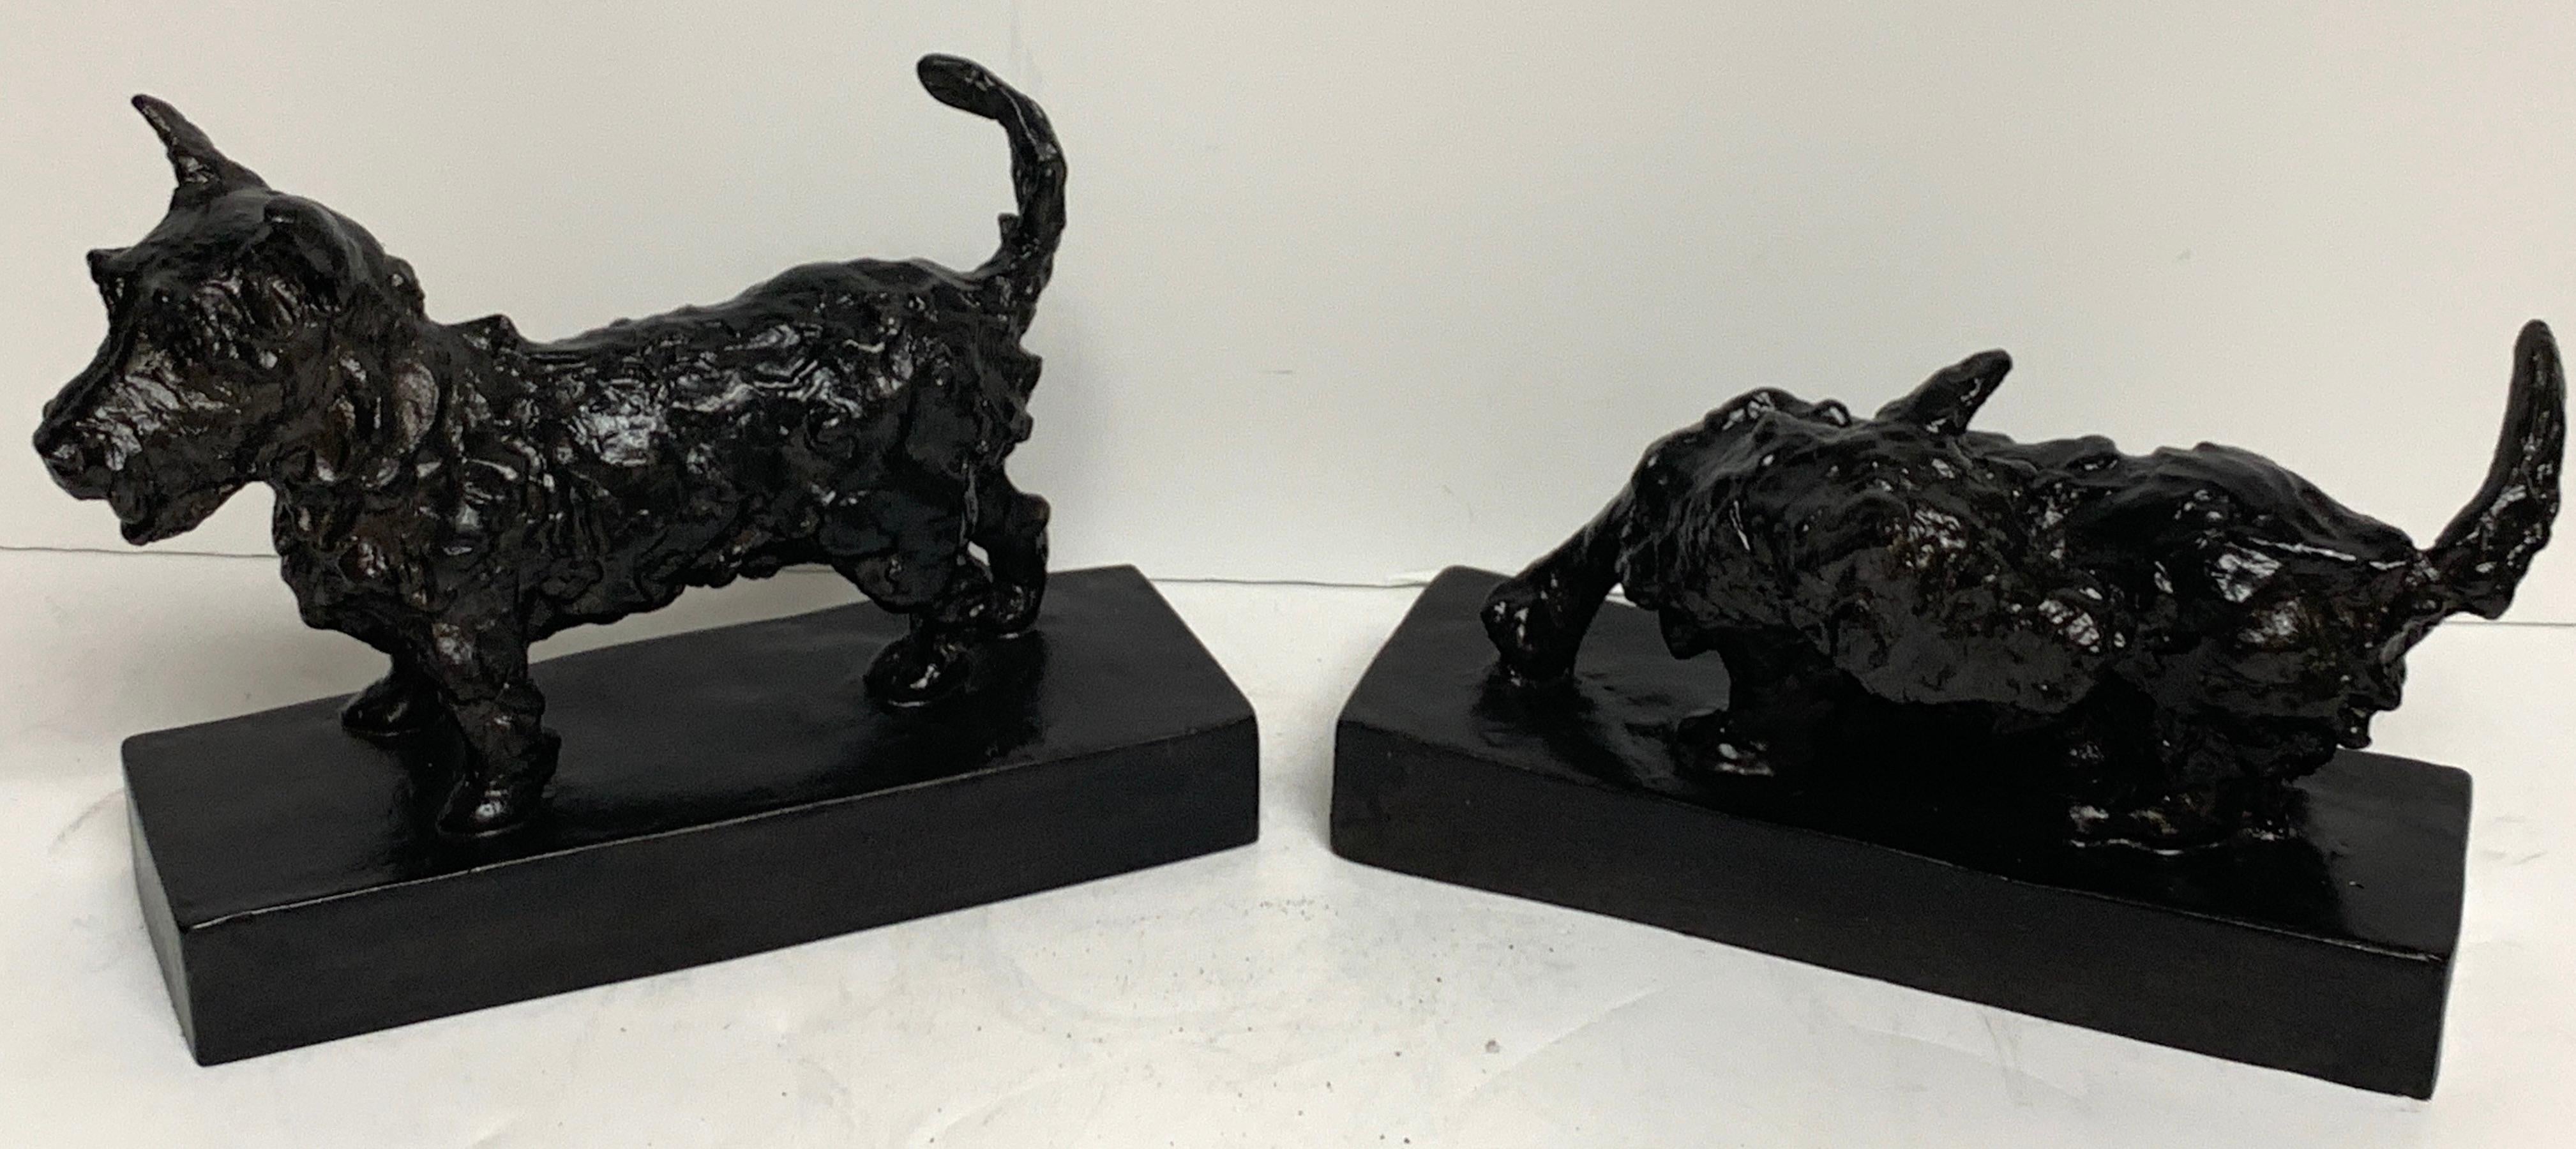 Edith Barretto Parsons, bronze terrier dog bookends
Edith Barretto Parsons, American (1878-1956)
Stamped: EB Parsons Measures:
Dog 1- 7